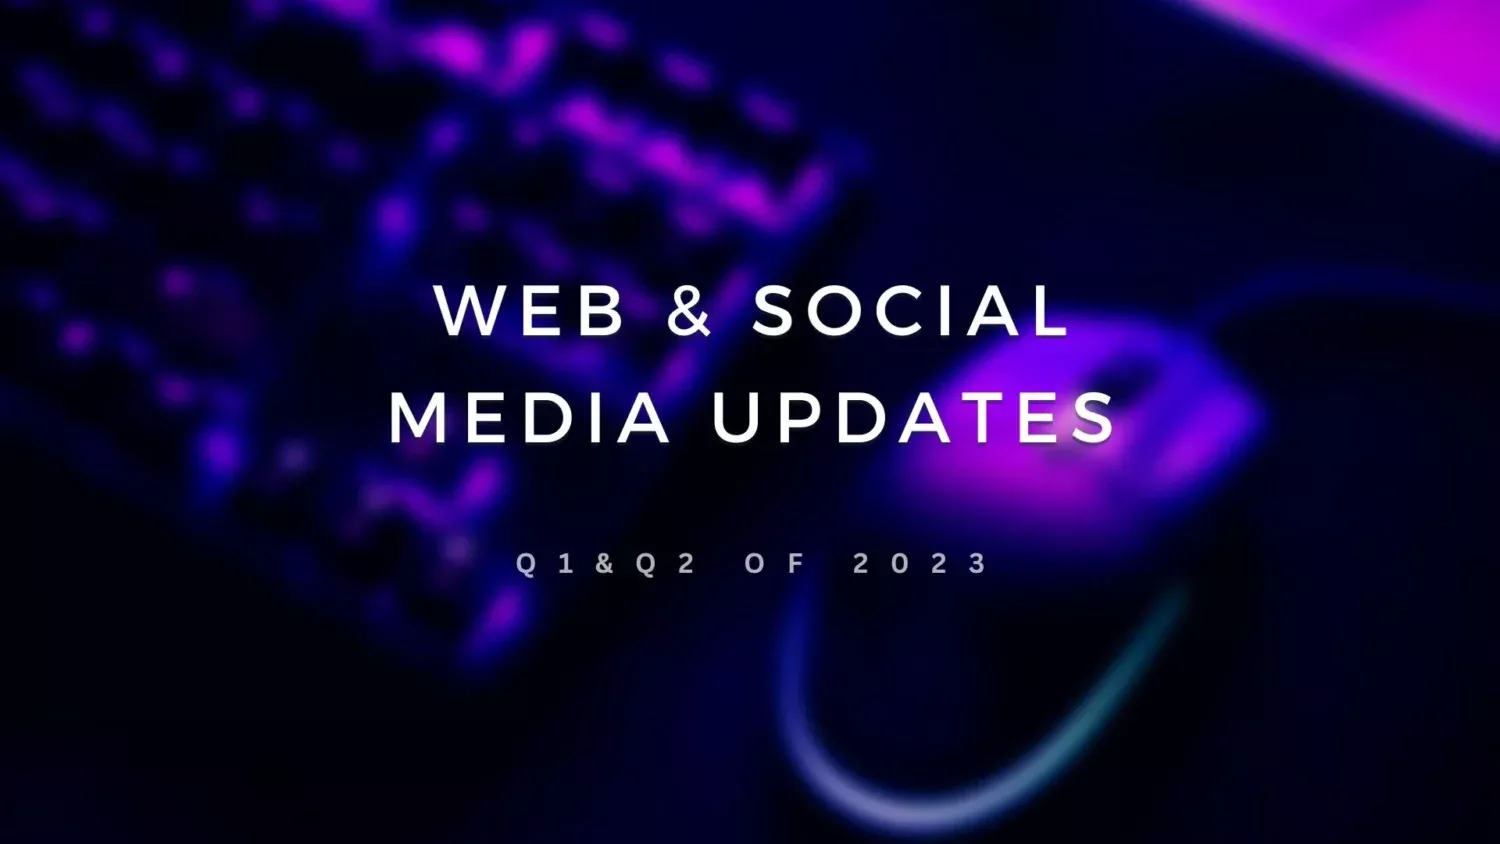 Web Site and Socials Update for Q1 and Q2 2023